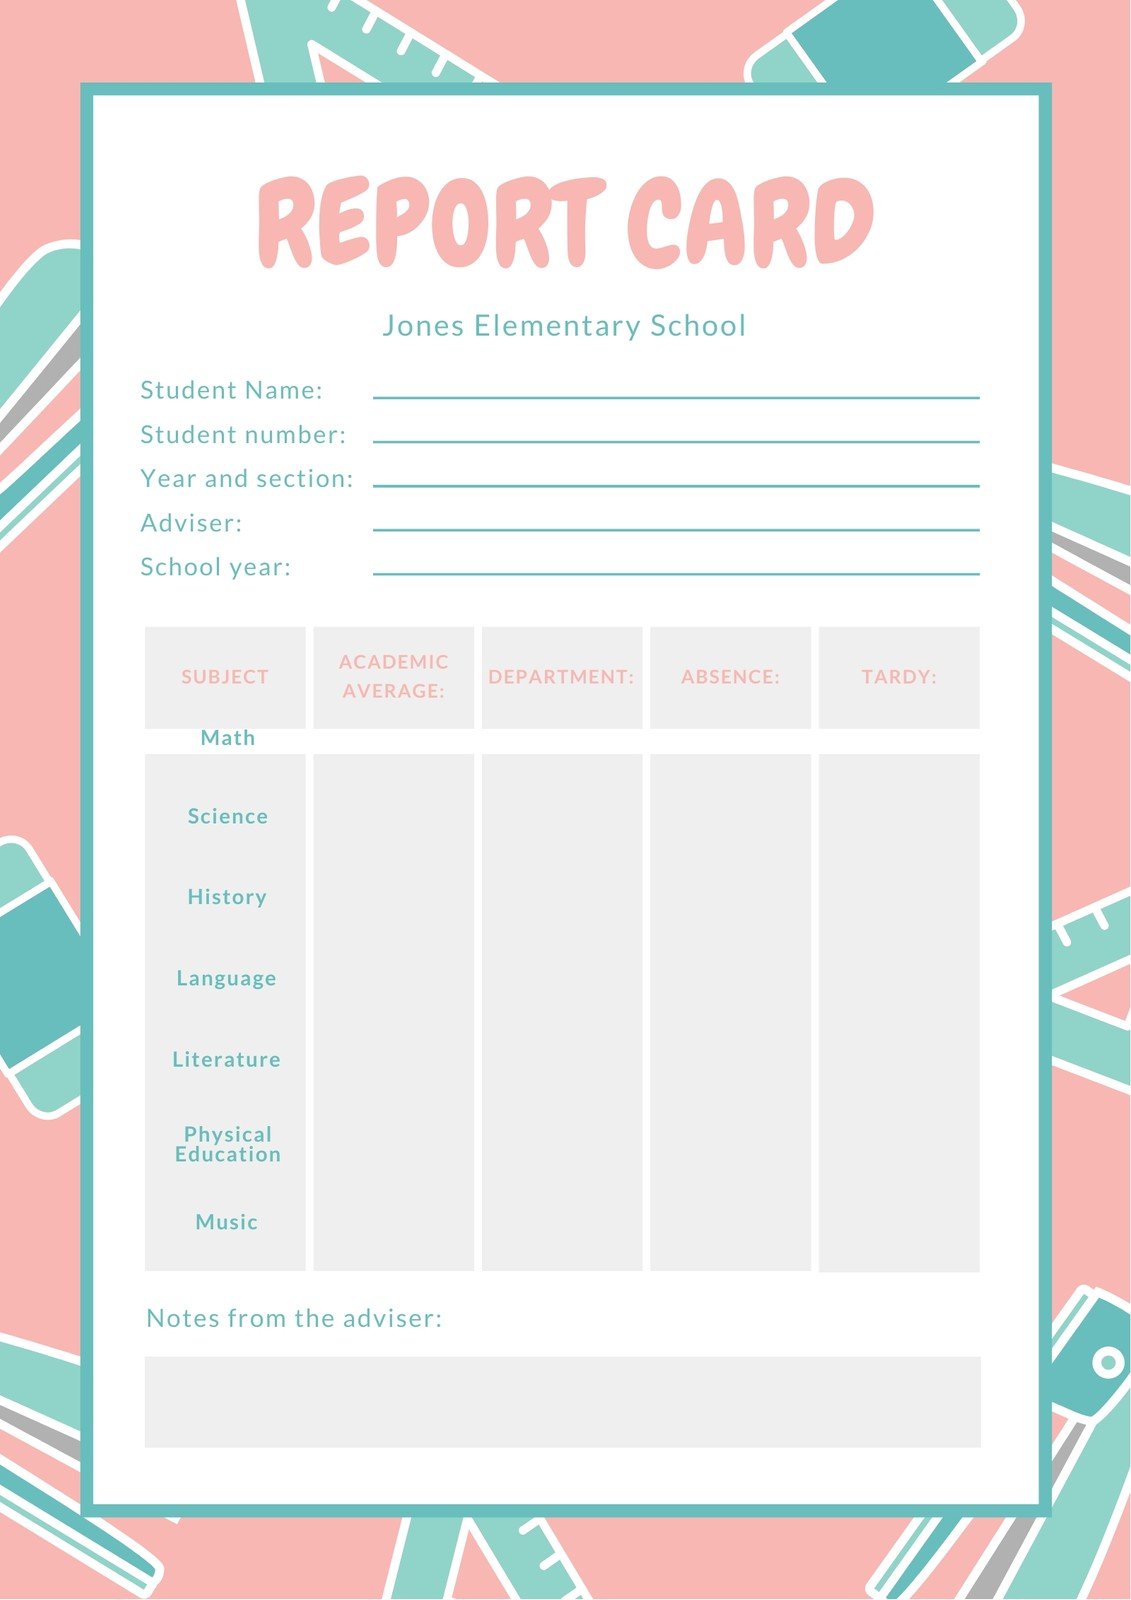 Customize 23+ Elementary School Report Cards Templates Online - Canva With Regard To Result Card Template